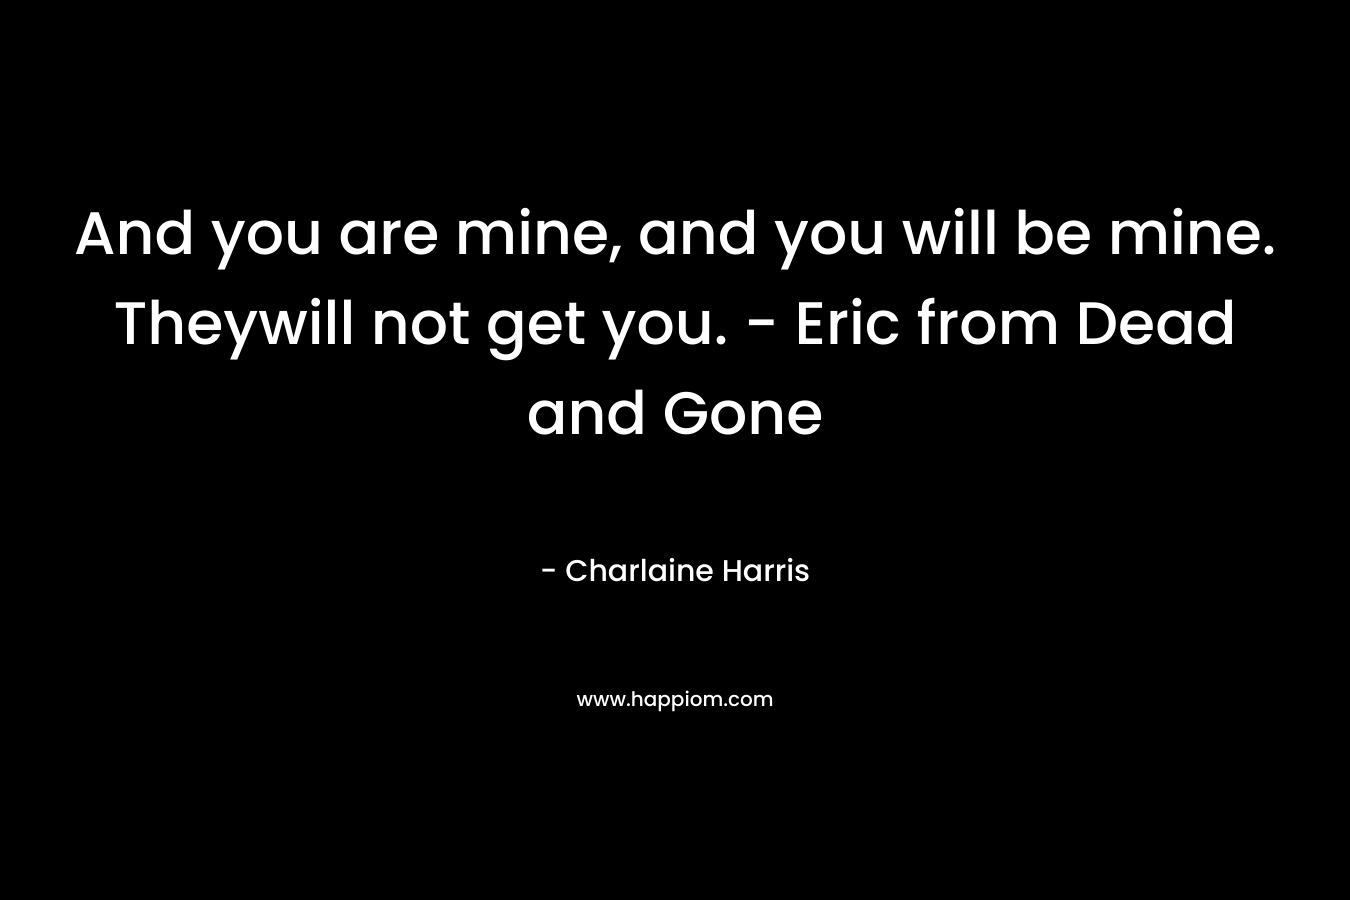 And you are mine, and you will be mine. Theywill not get you. - Eric from Dead and Gone